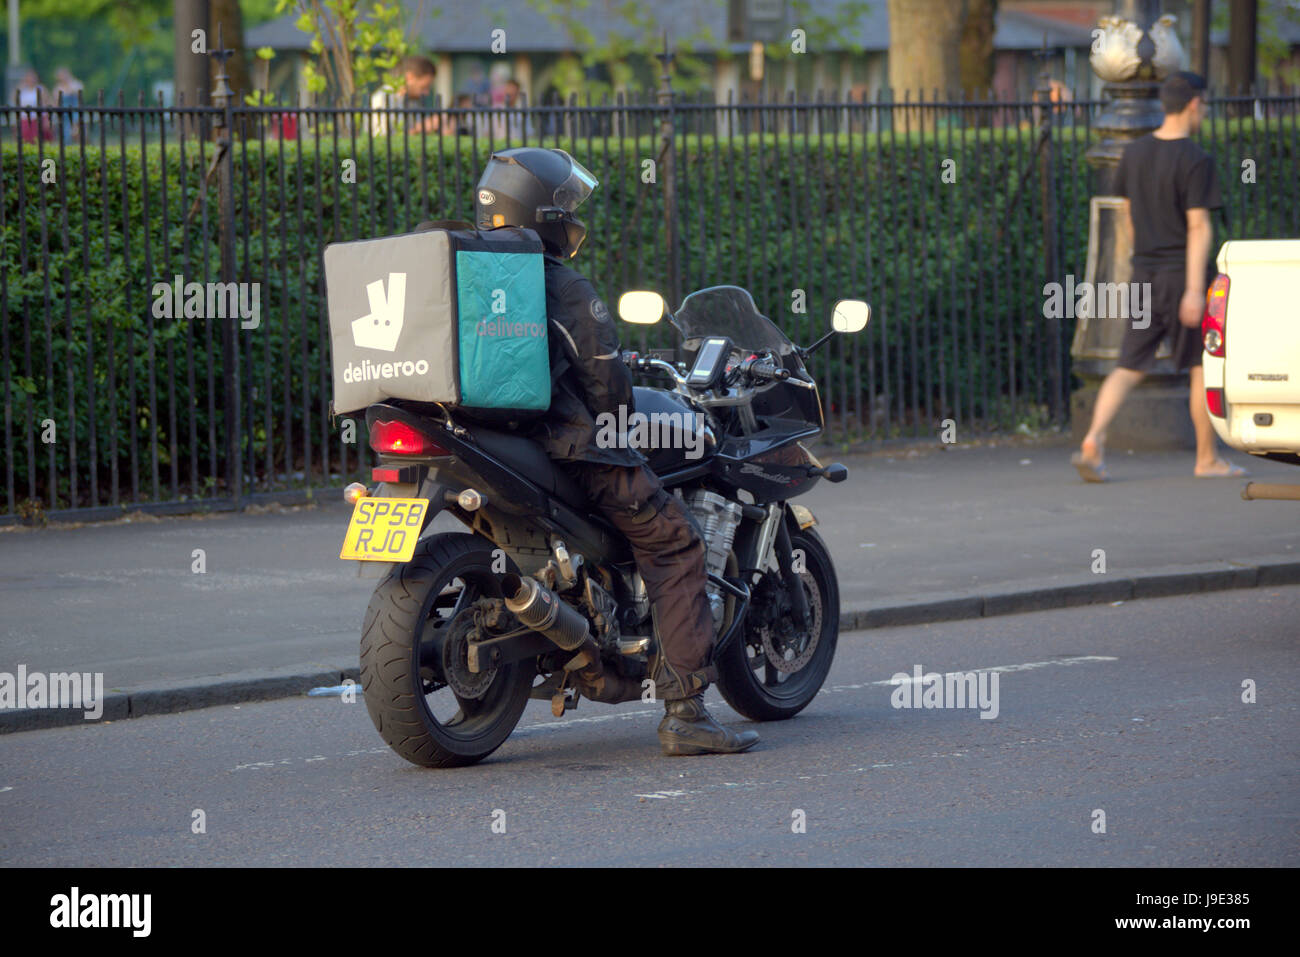 Deliveroo motorcycle delivery man Glasgow west end Stock Photo